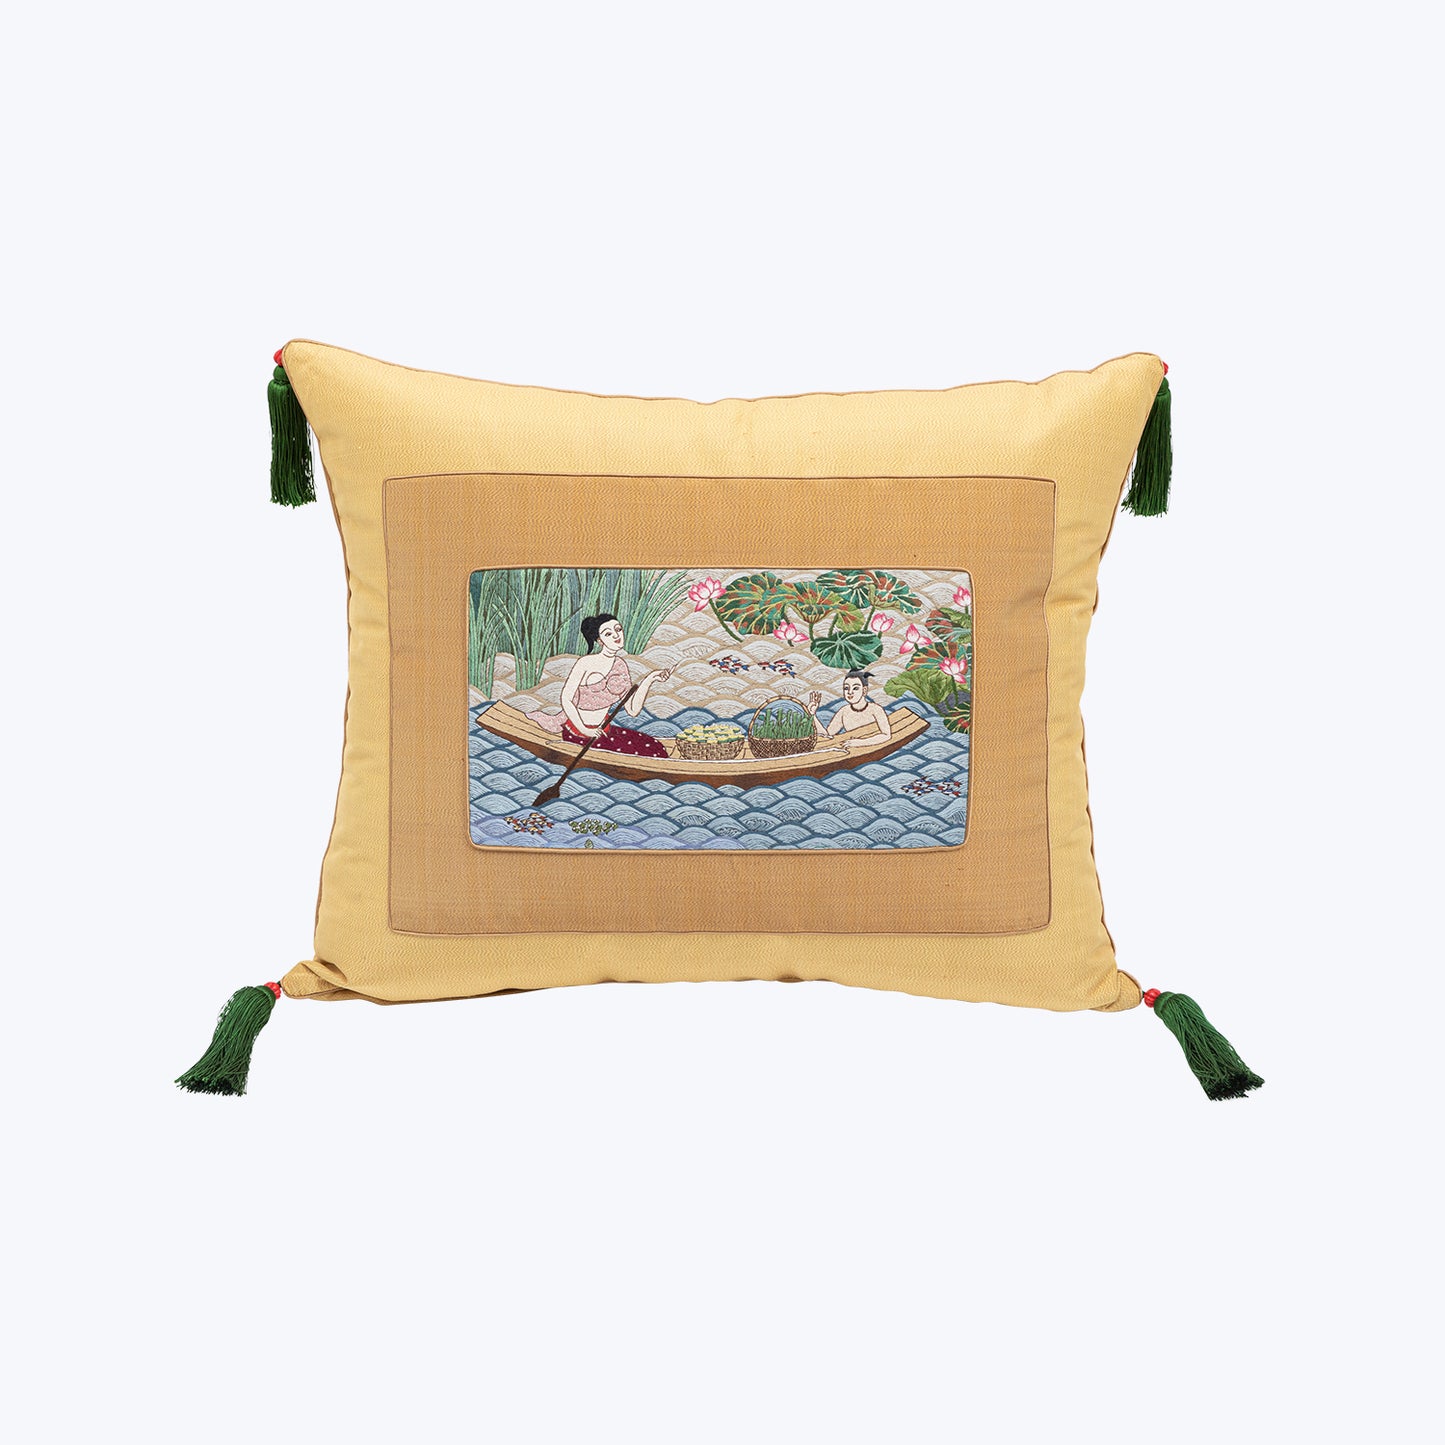 Gold Cushion with Rowboat Embriodery, Red Lacquer Bead and Tassels